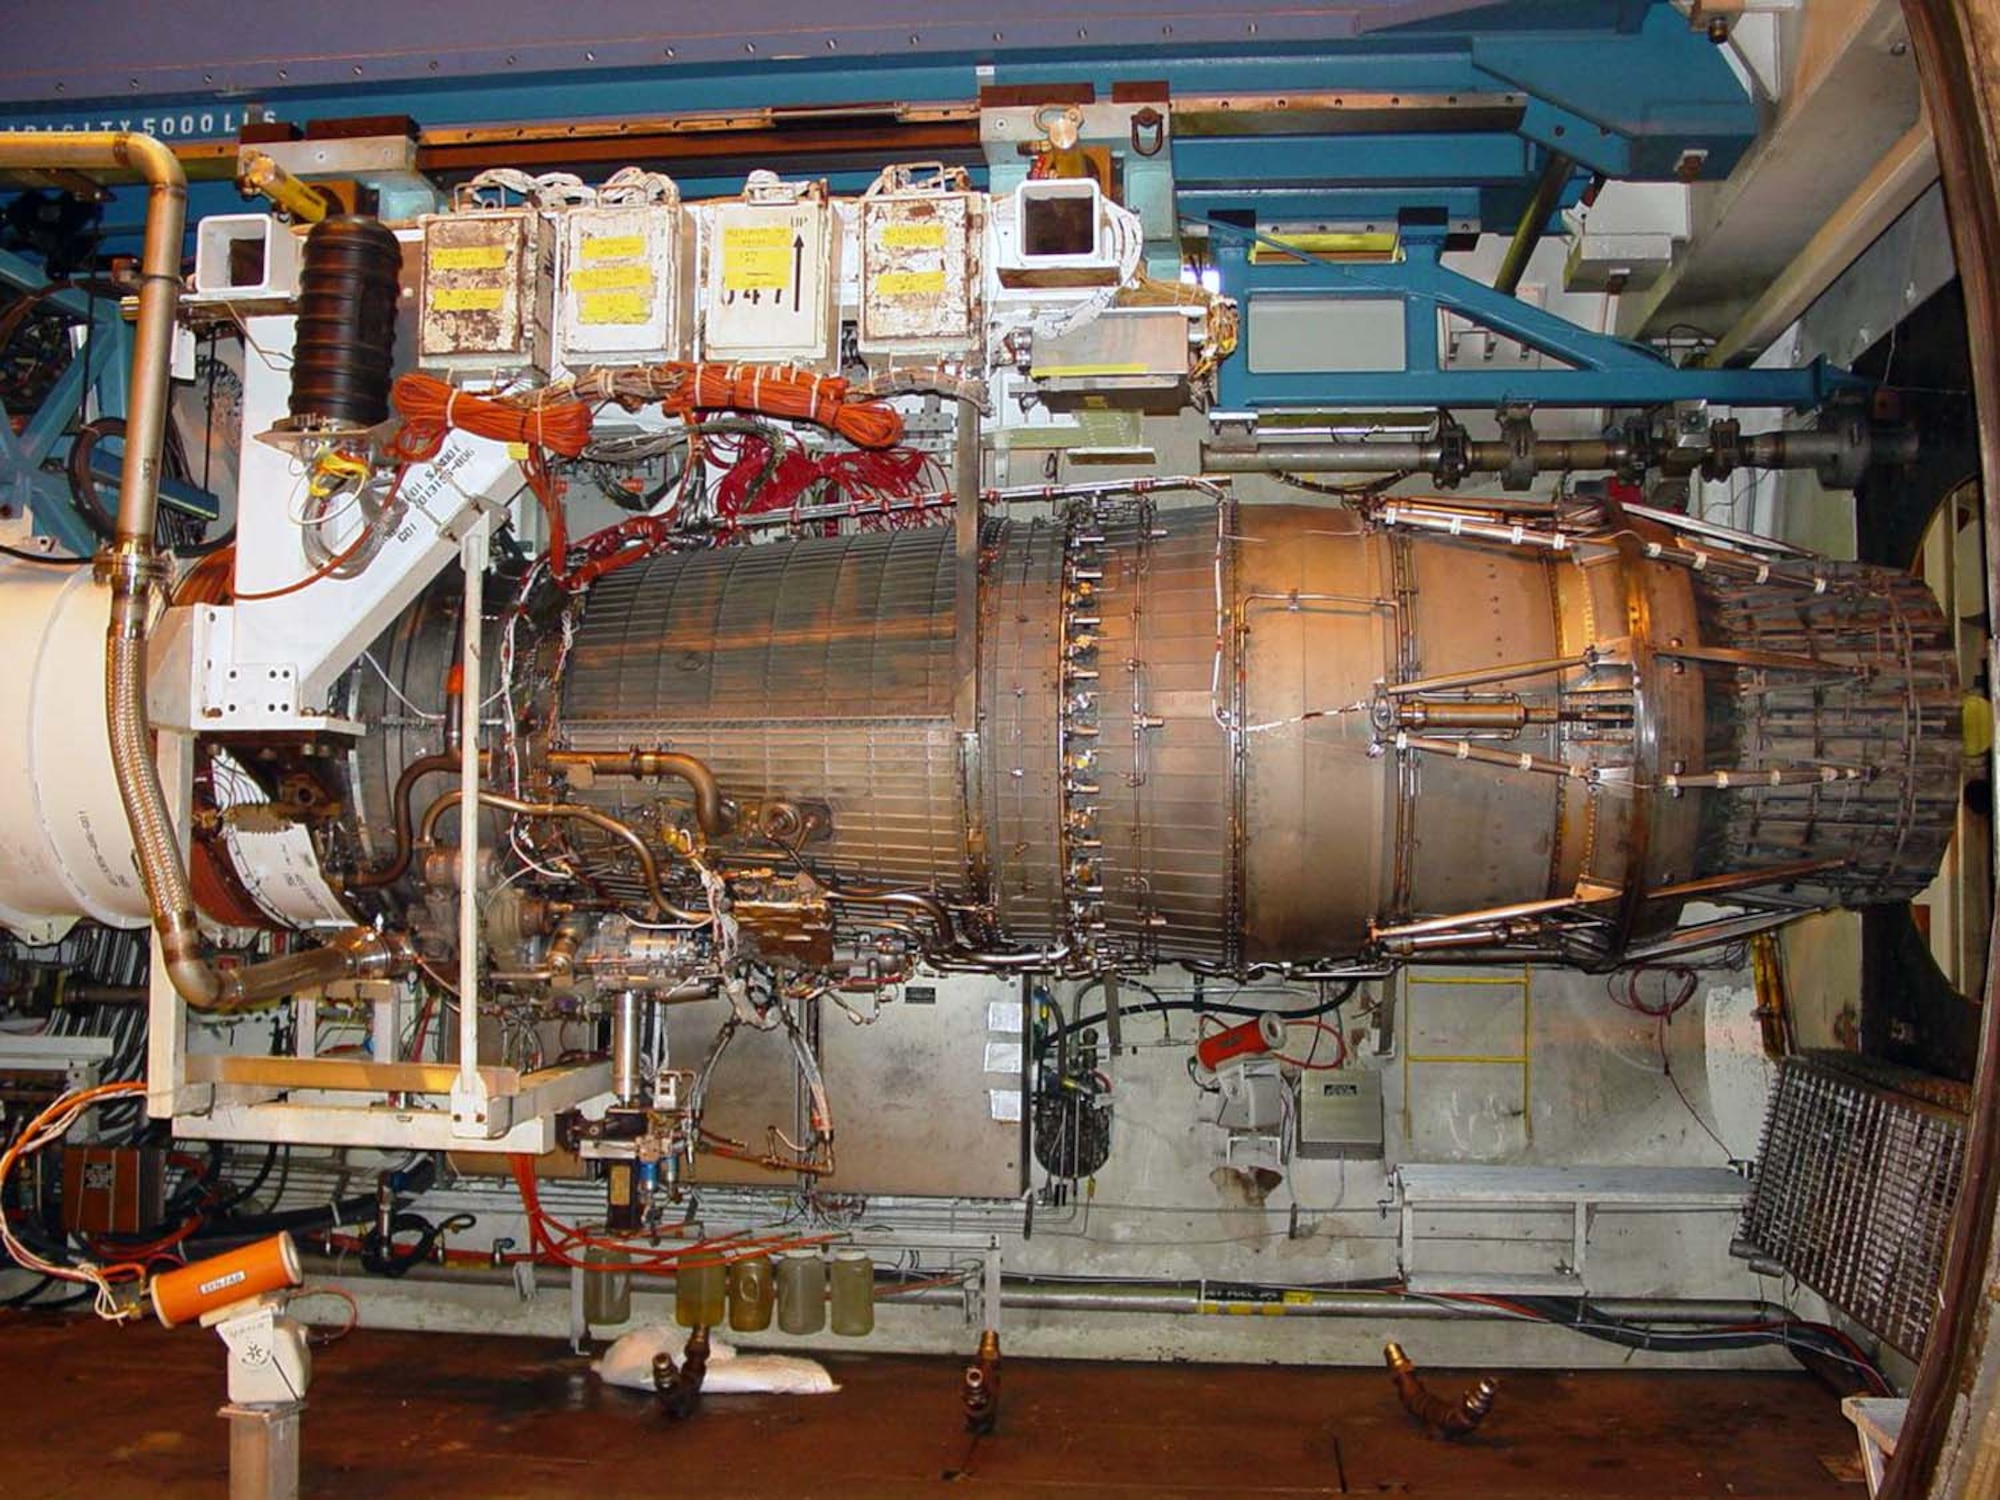 A General Electric F101 engine serves as the power plant for the B-1B Lancer. The engine has undergone a variety of altitude tests in Arnold Engineering Development Center's aero-propulsion J-1 test cell. (U.S. Air Force photo)